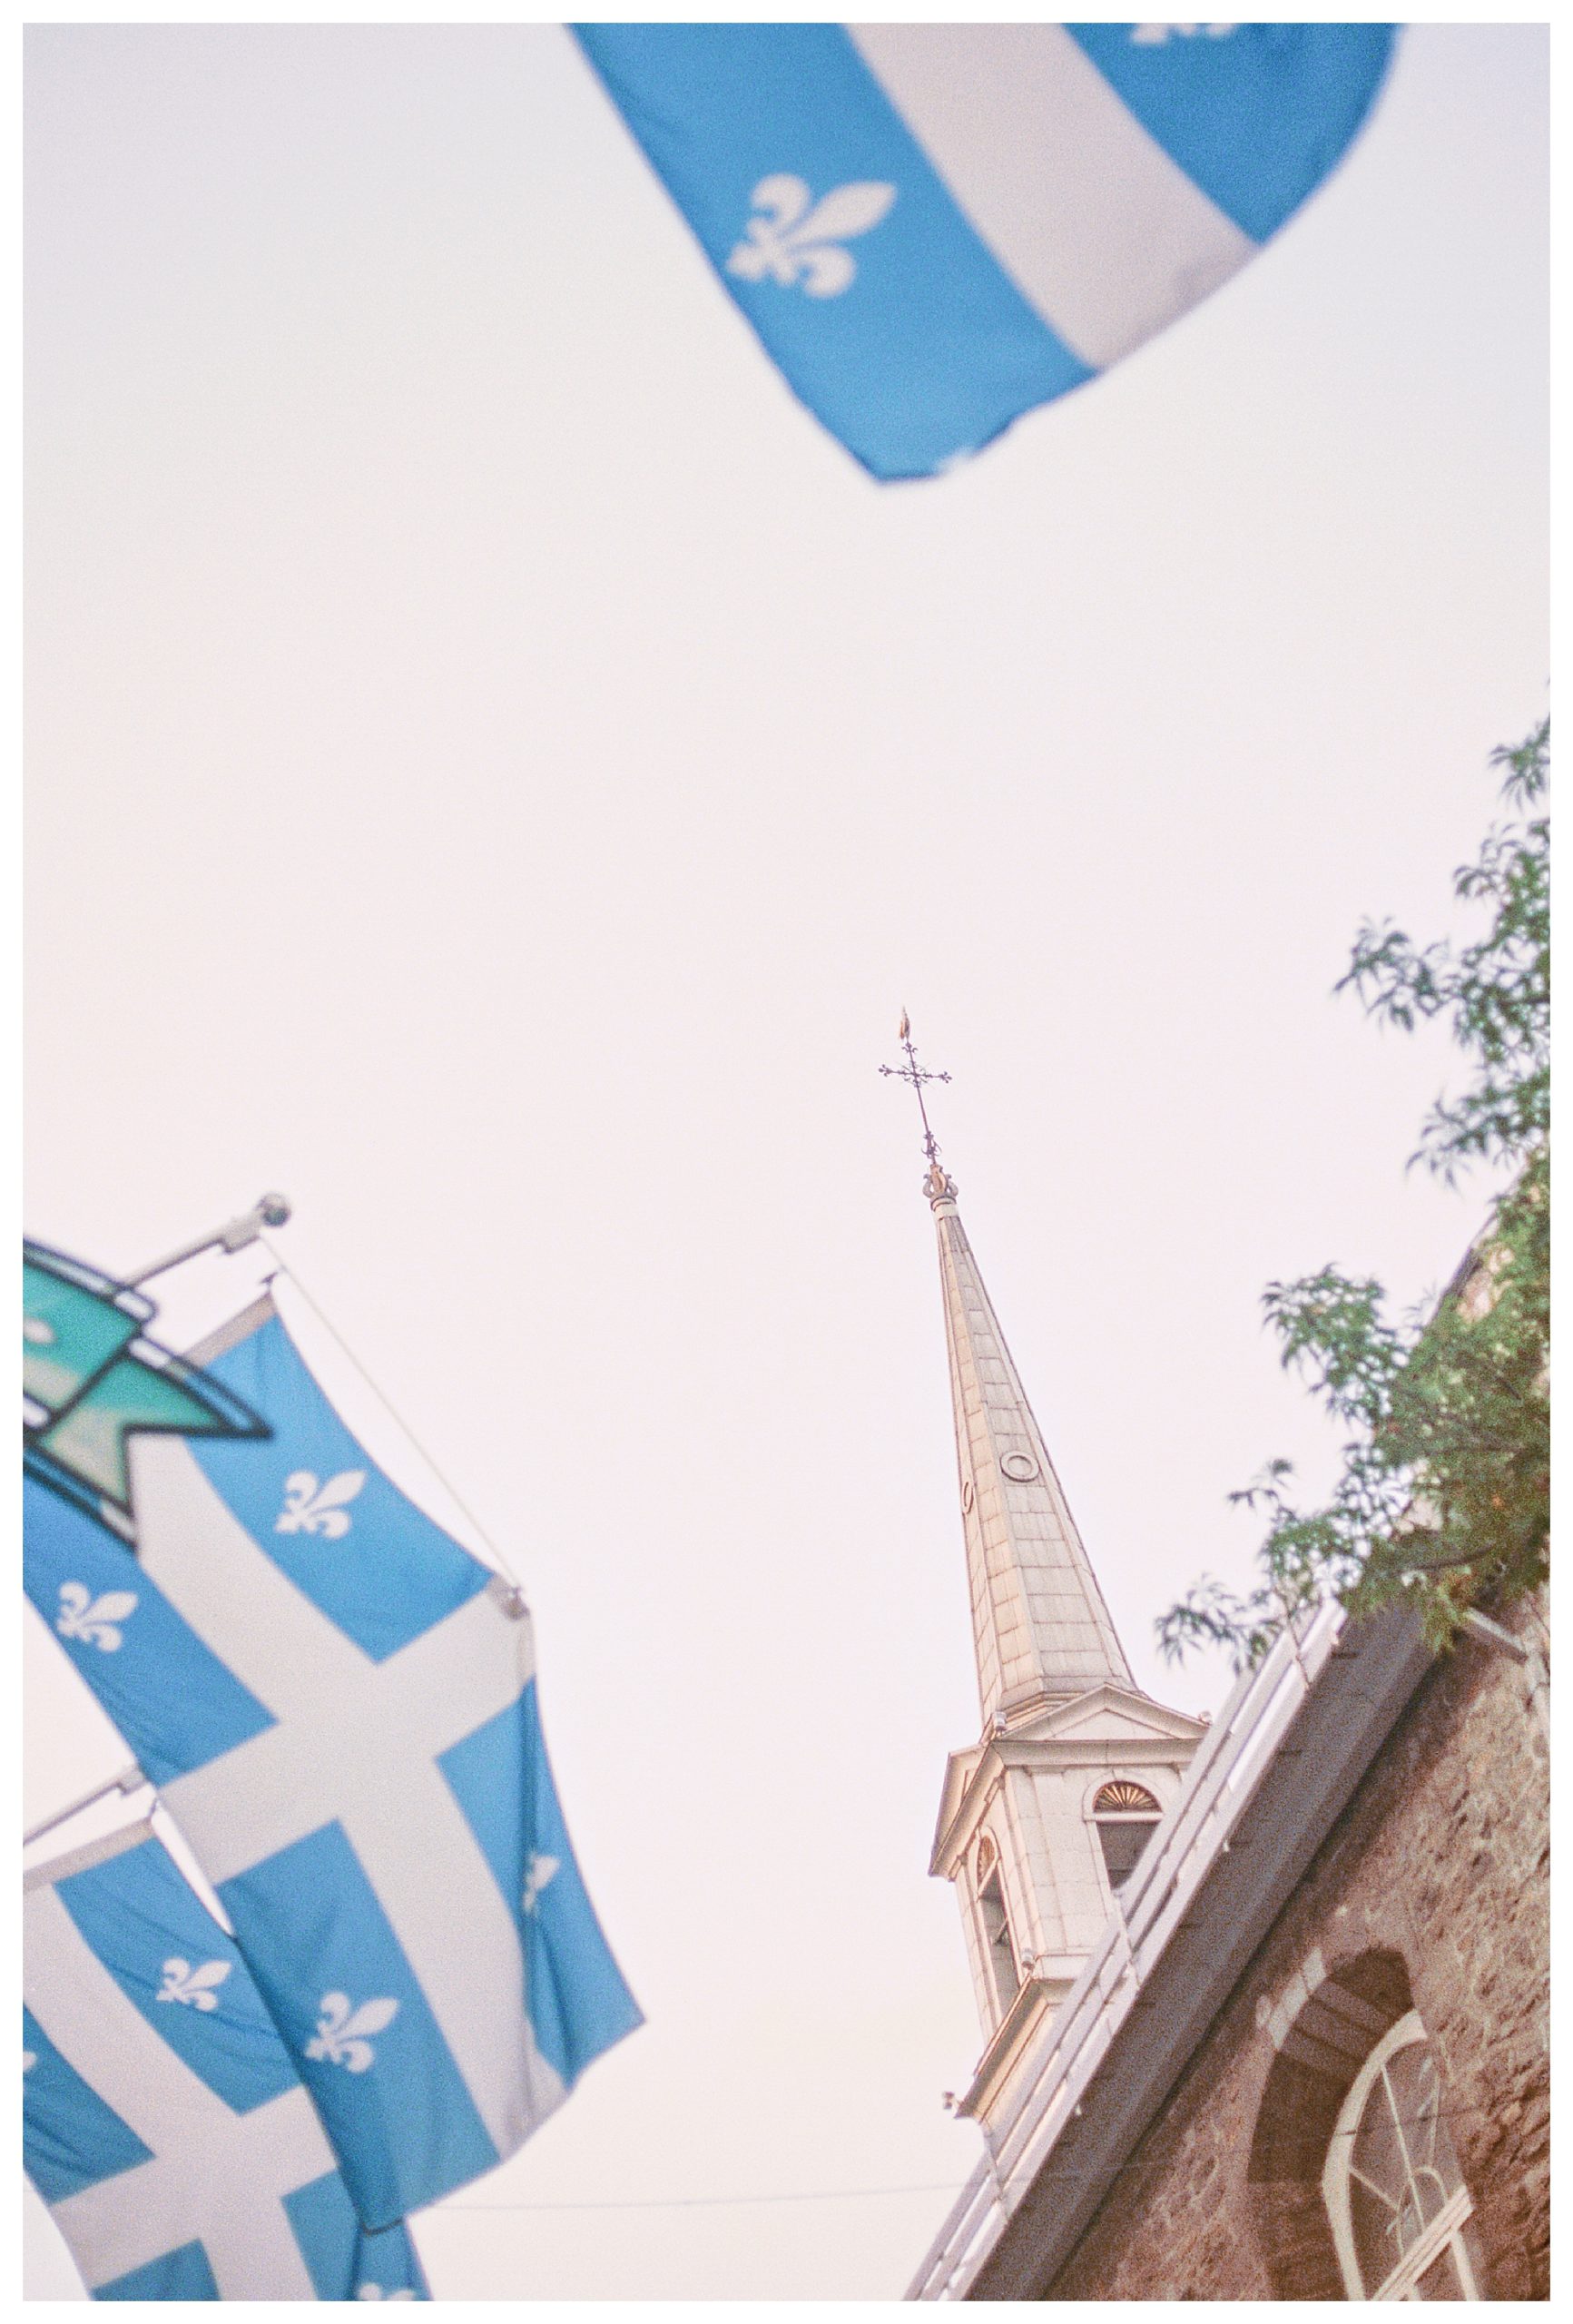 The Montreal flag waves in front of a church steeple in Quebec City.